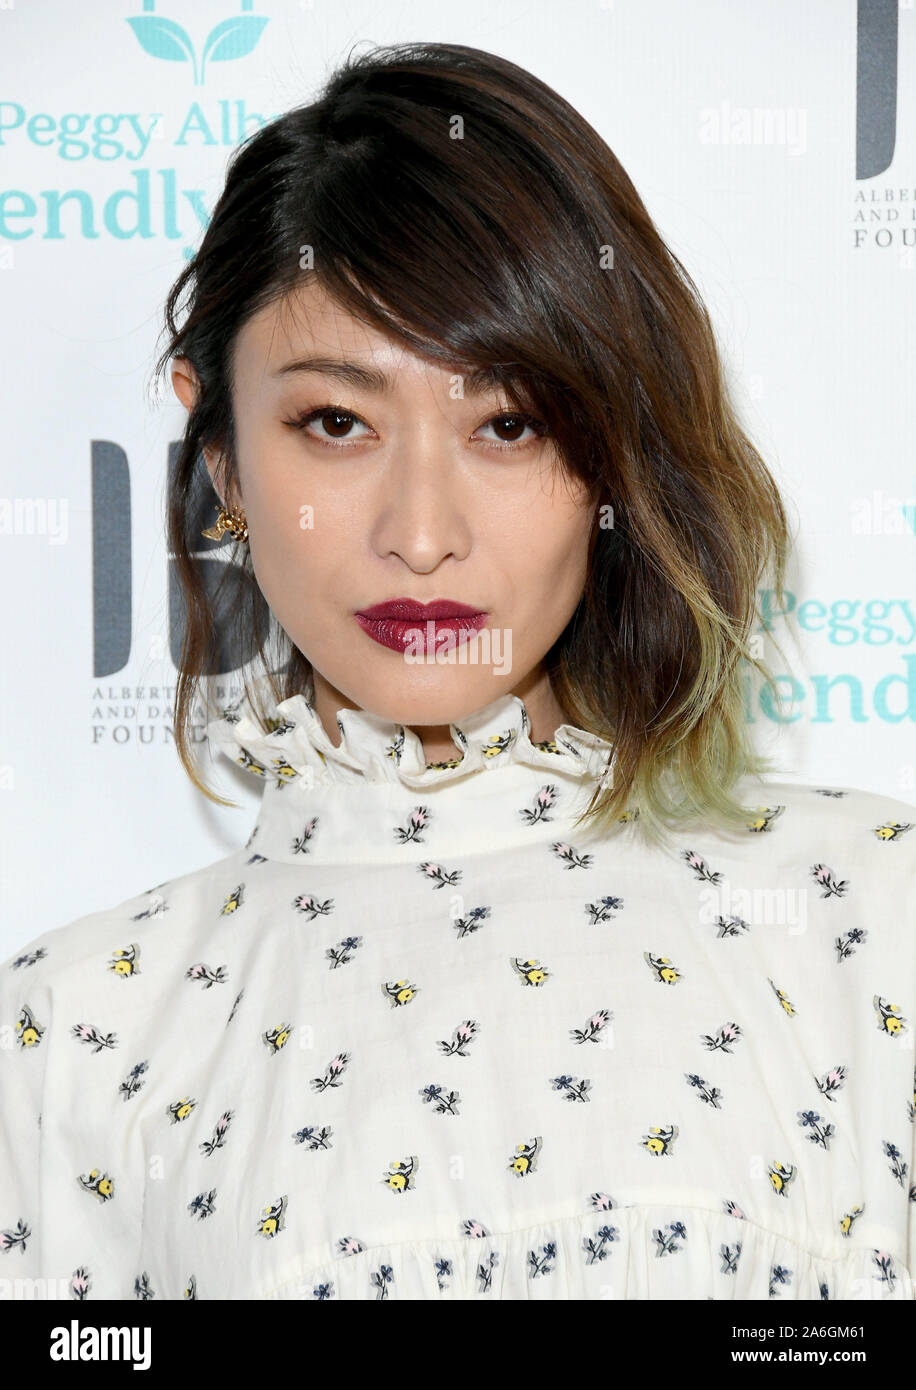 October 25, 2019, Beverly Hills, California, USA: 26 October 2019 -Beverly Hills, California - Yu Yamada. Friendly House 30th Annual Awards Luncheon held at the Beverly Hilton Hotel. Photo Credit: Birdie Thompson/AdMedia (Credit Image: © Birdie Thompson/AdMedia via ZUMA Wire) Stock Photo